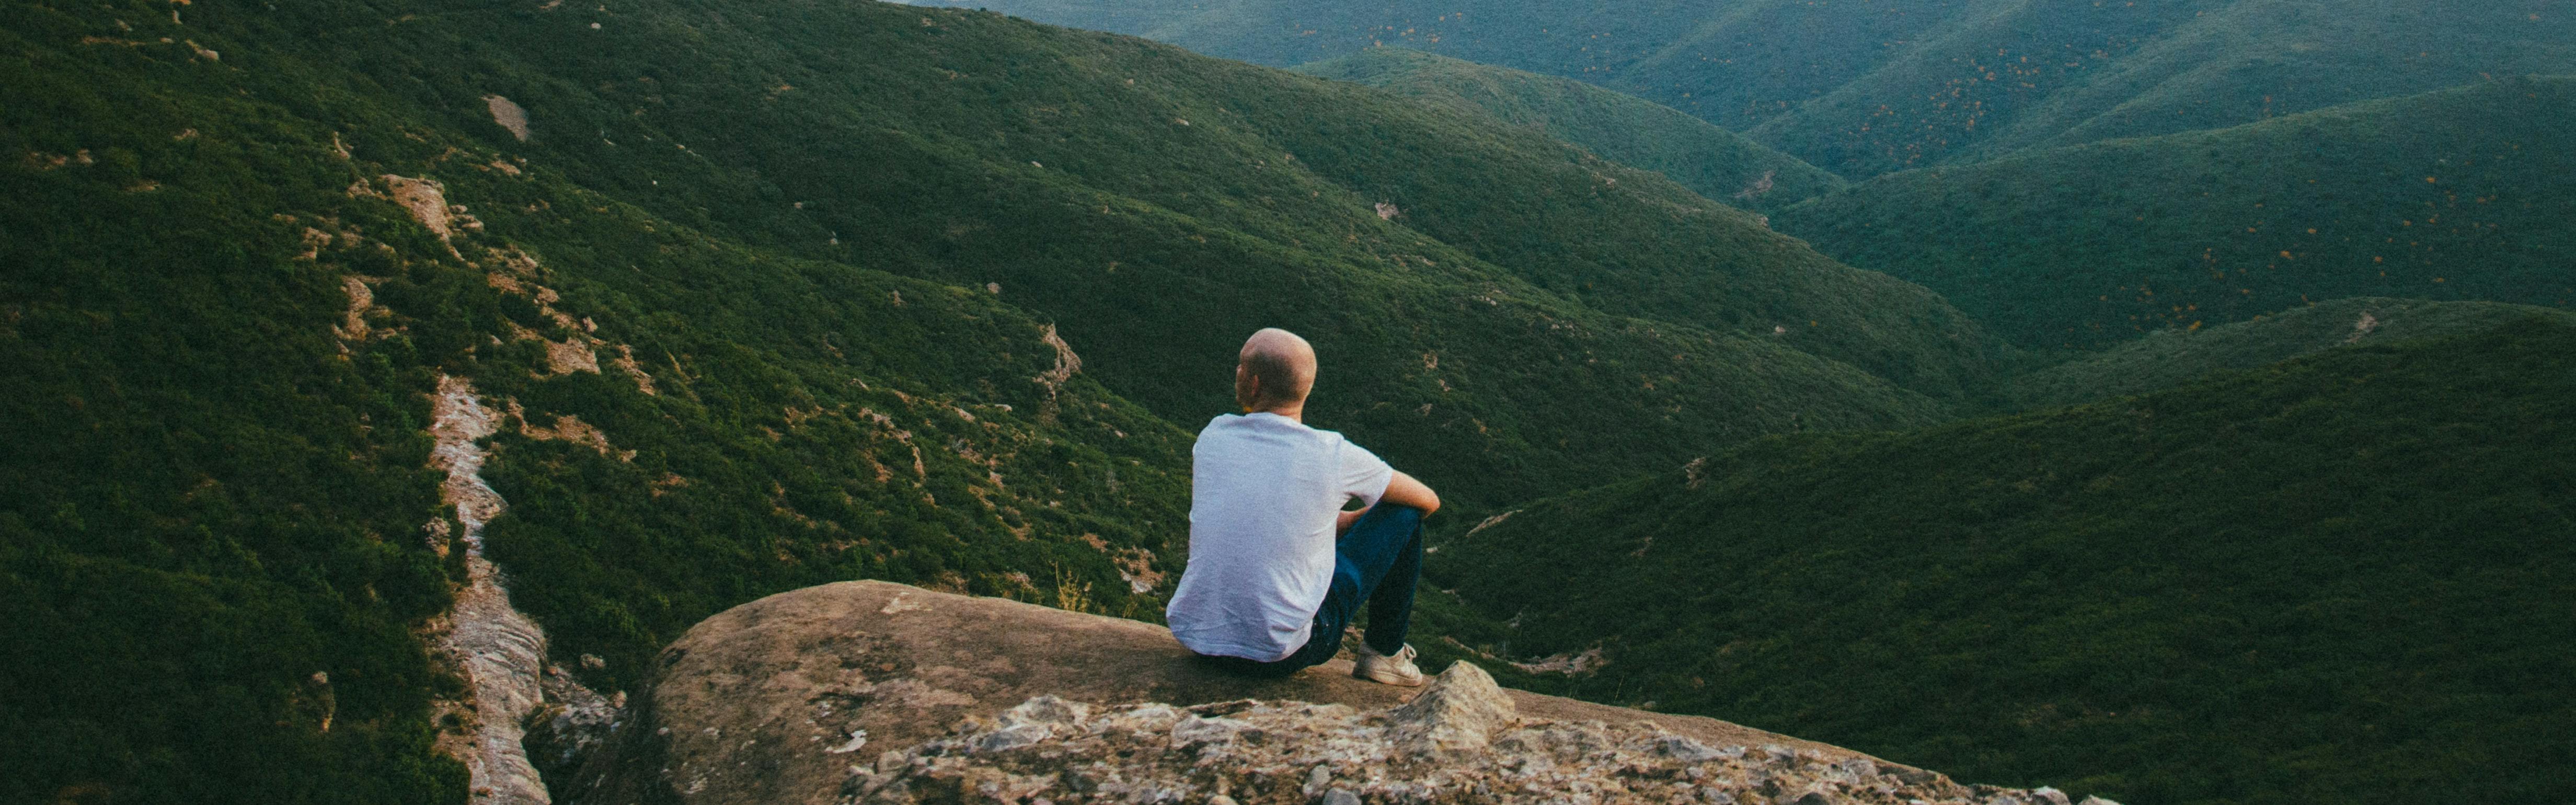 A man sitting on a rock looking out at the green valley below